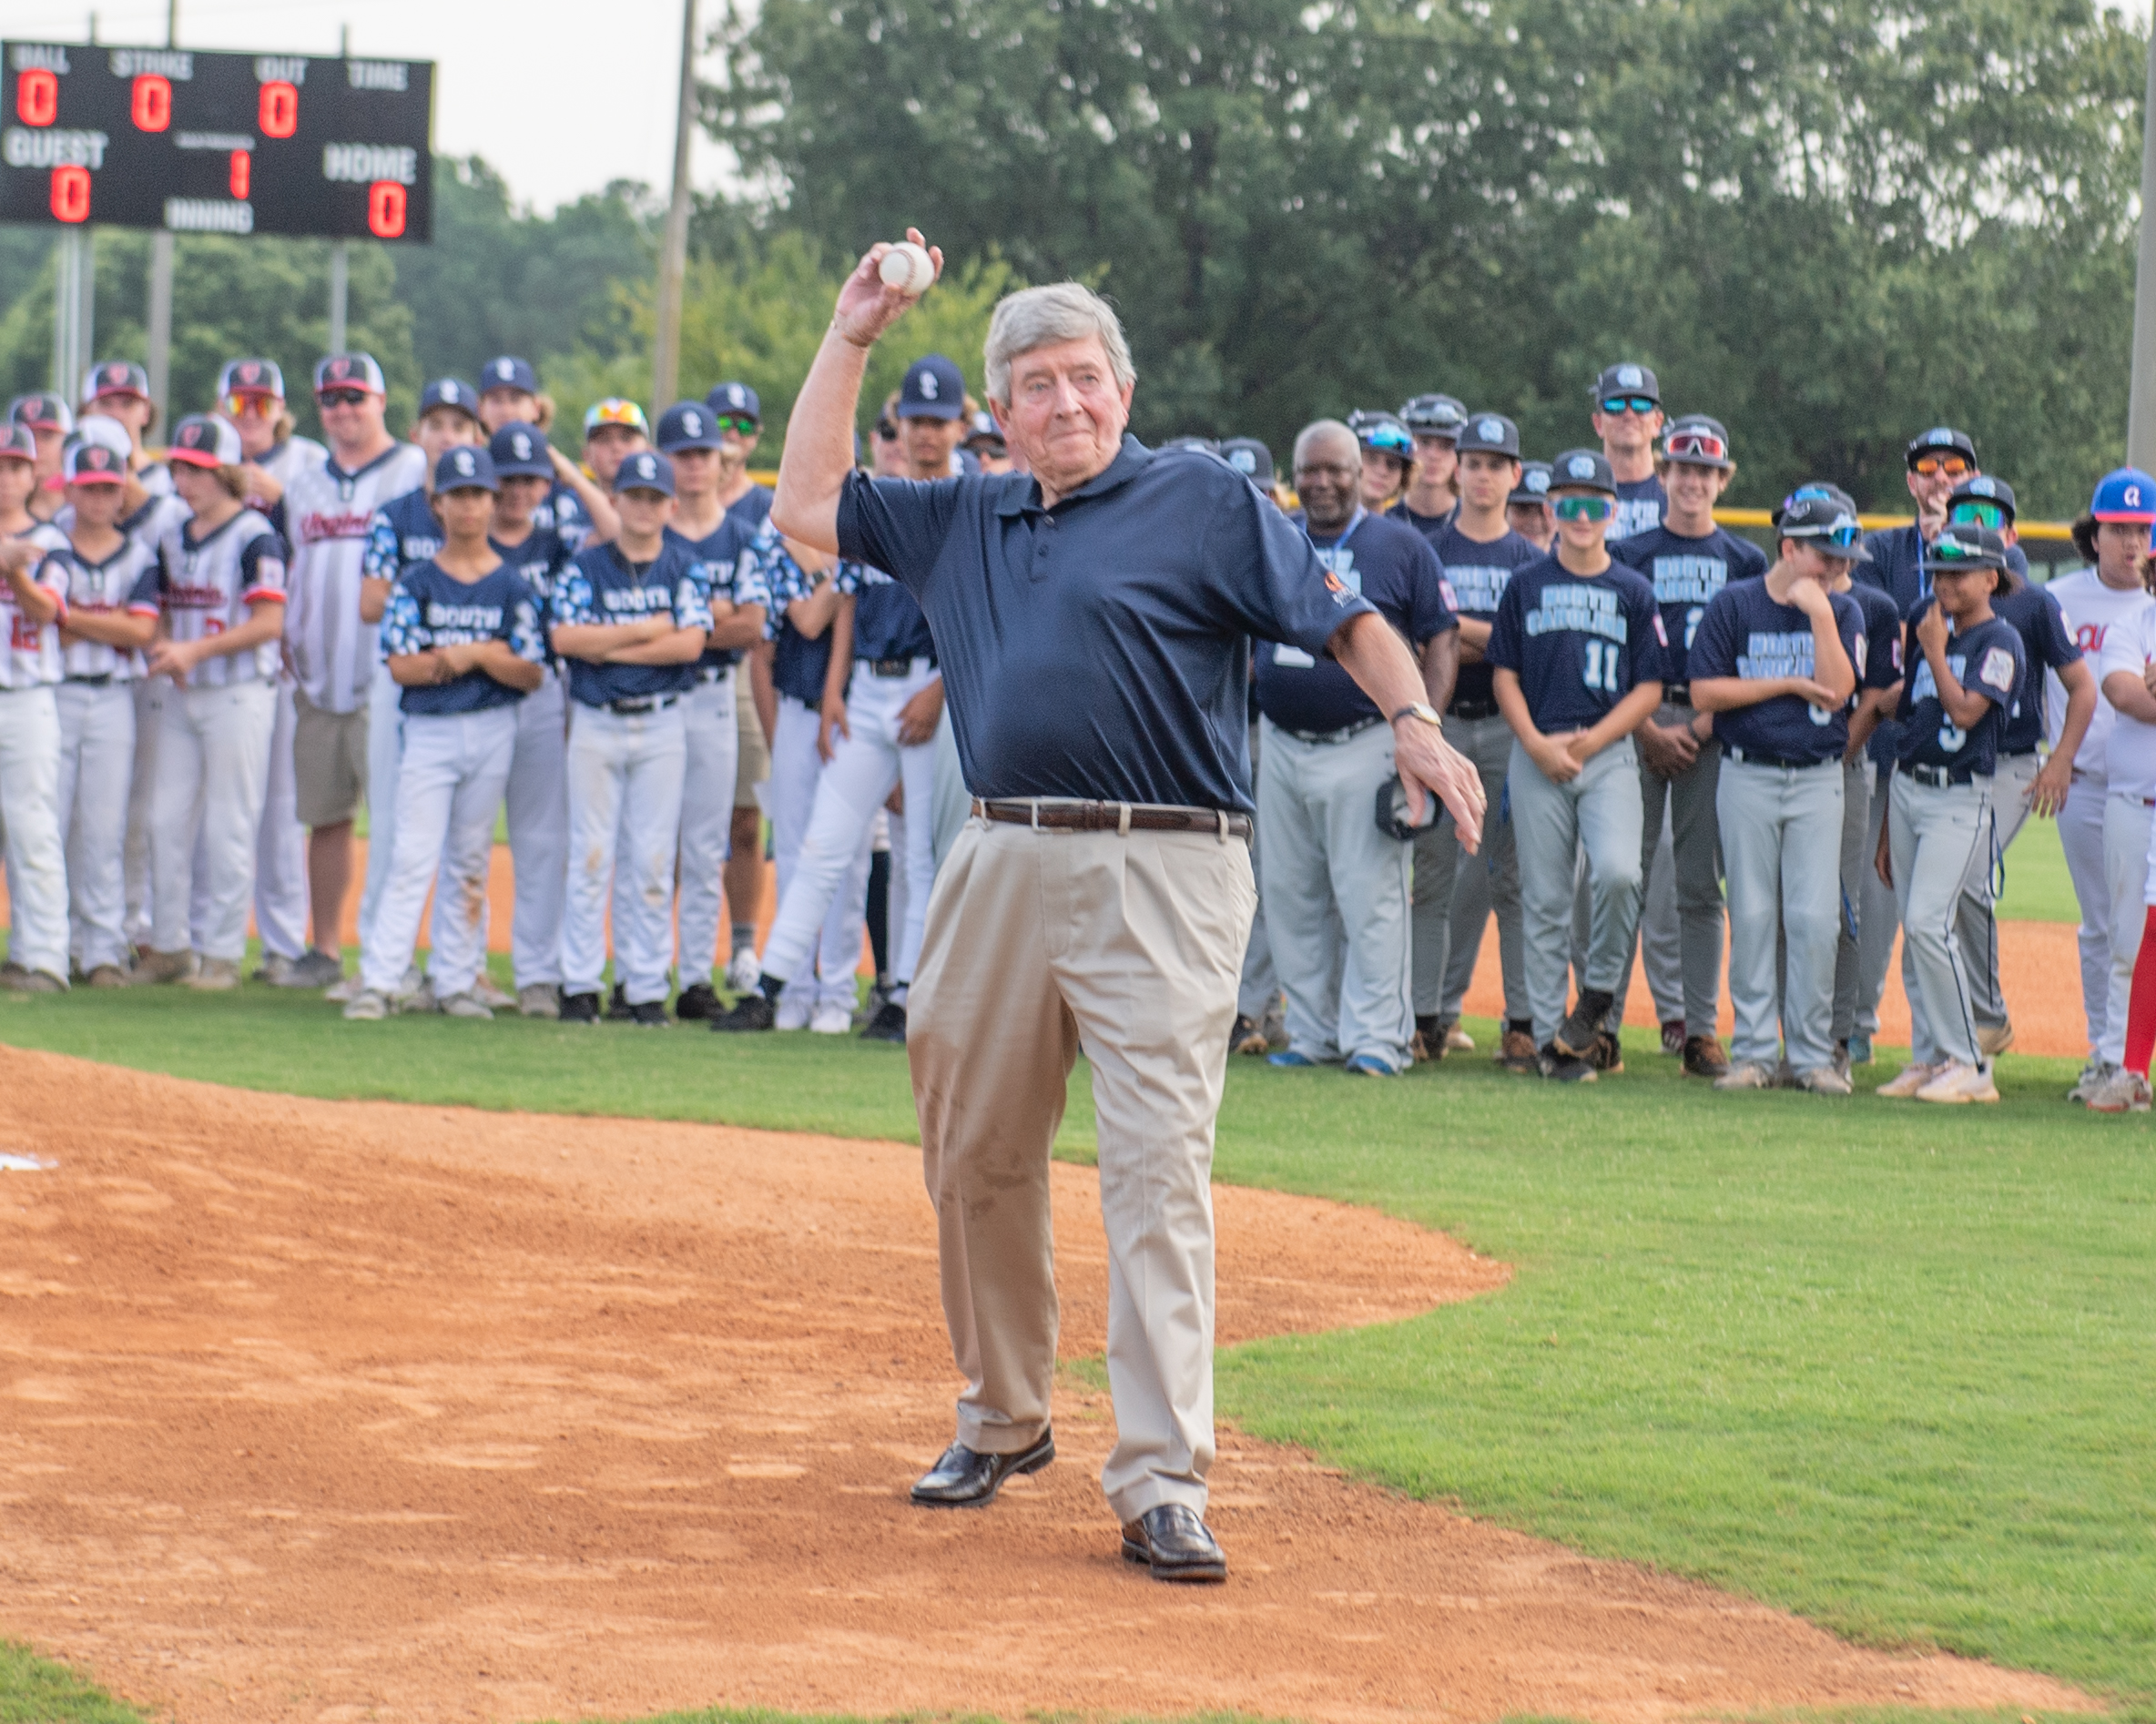 The Observer Captures Photos of the 2023 Junior Boys World Series Games in Opelika